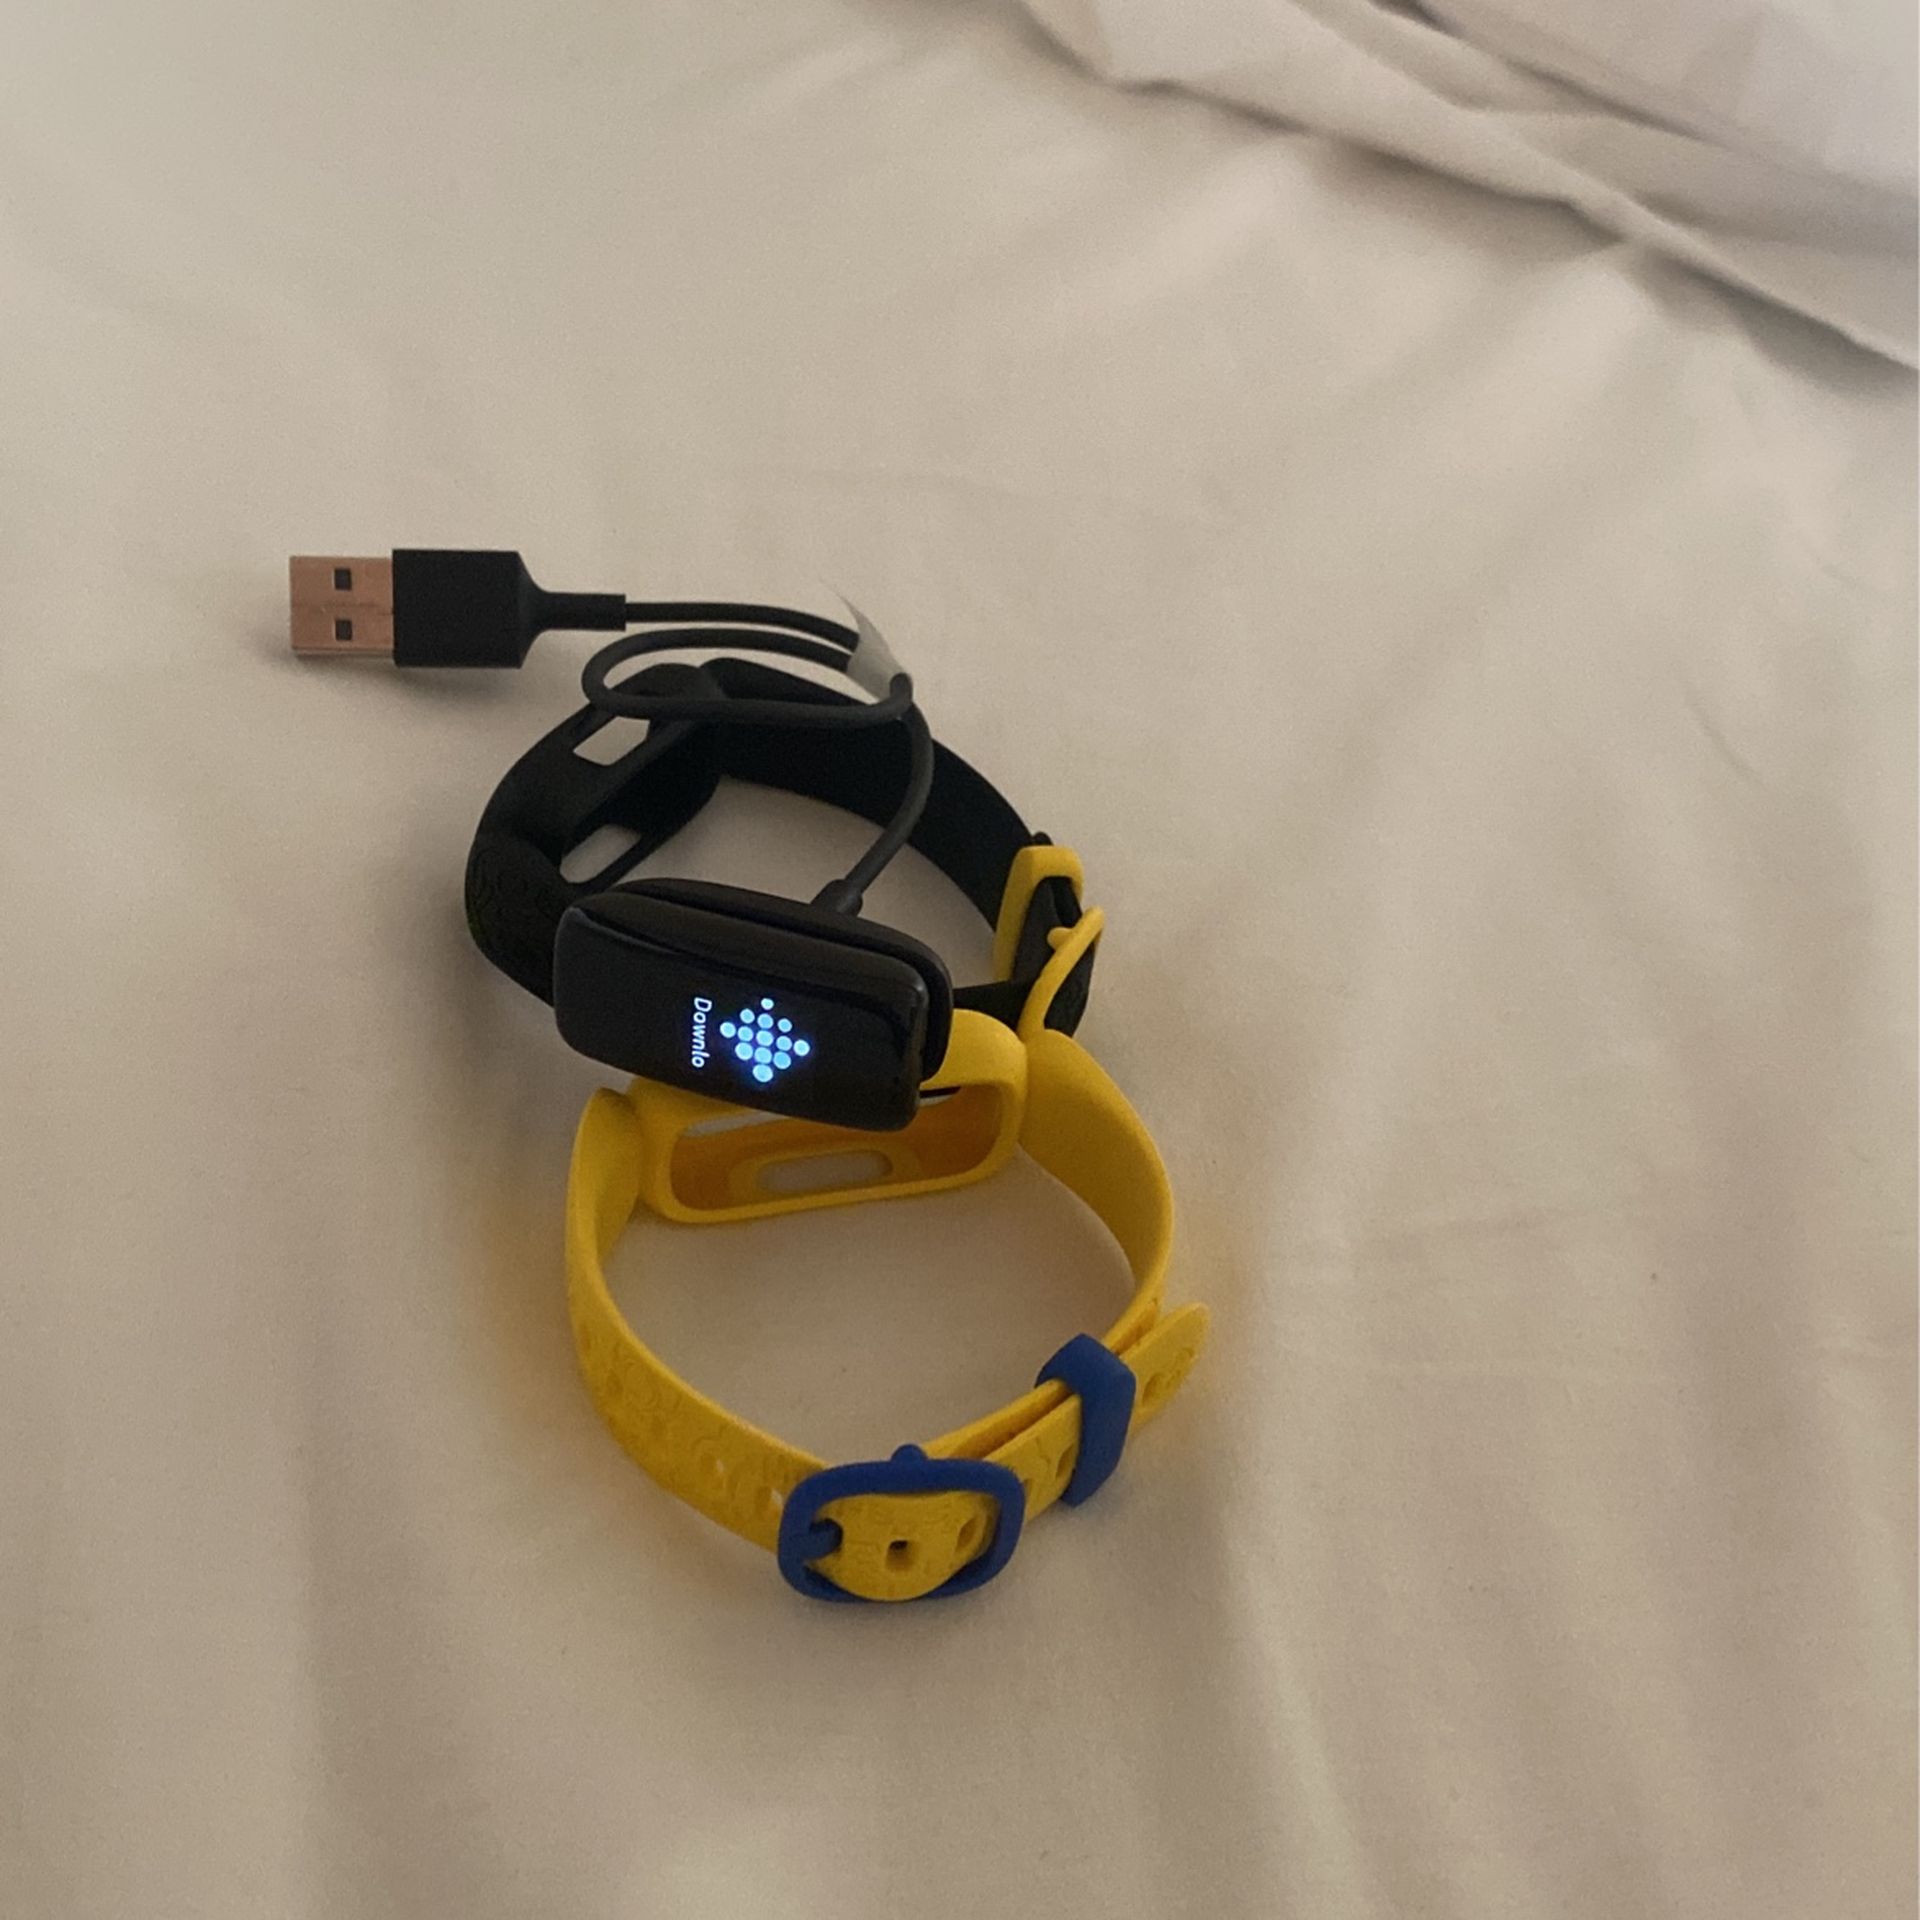 Ace 3 Minion Edition Fitbit For Kids 